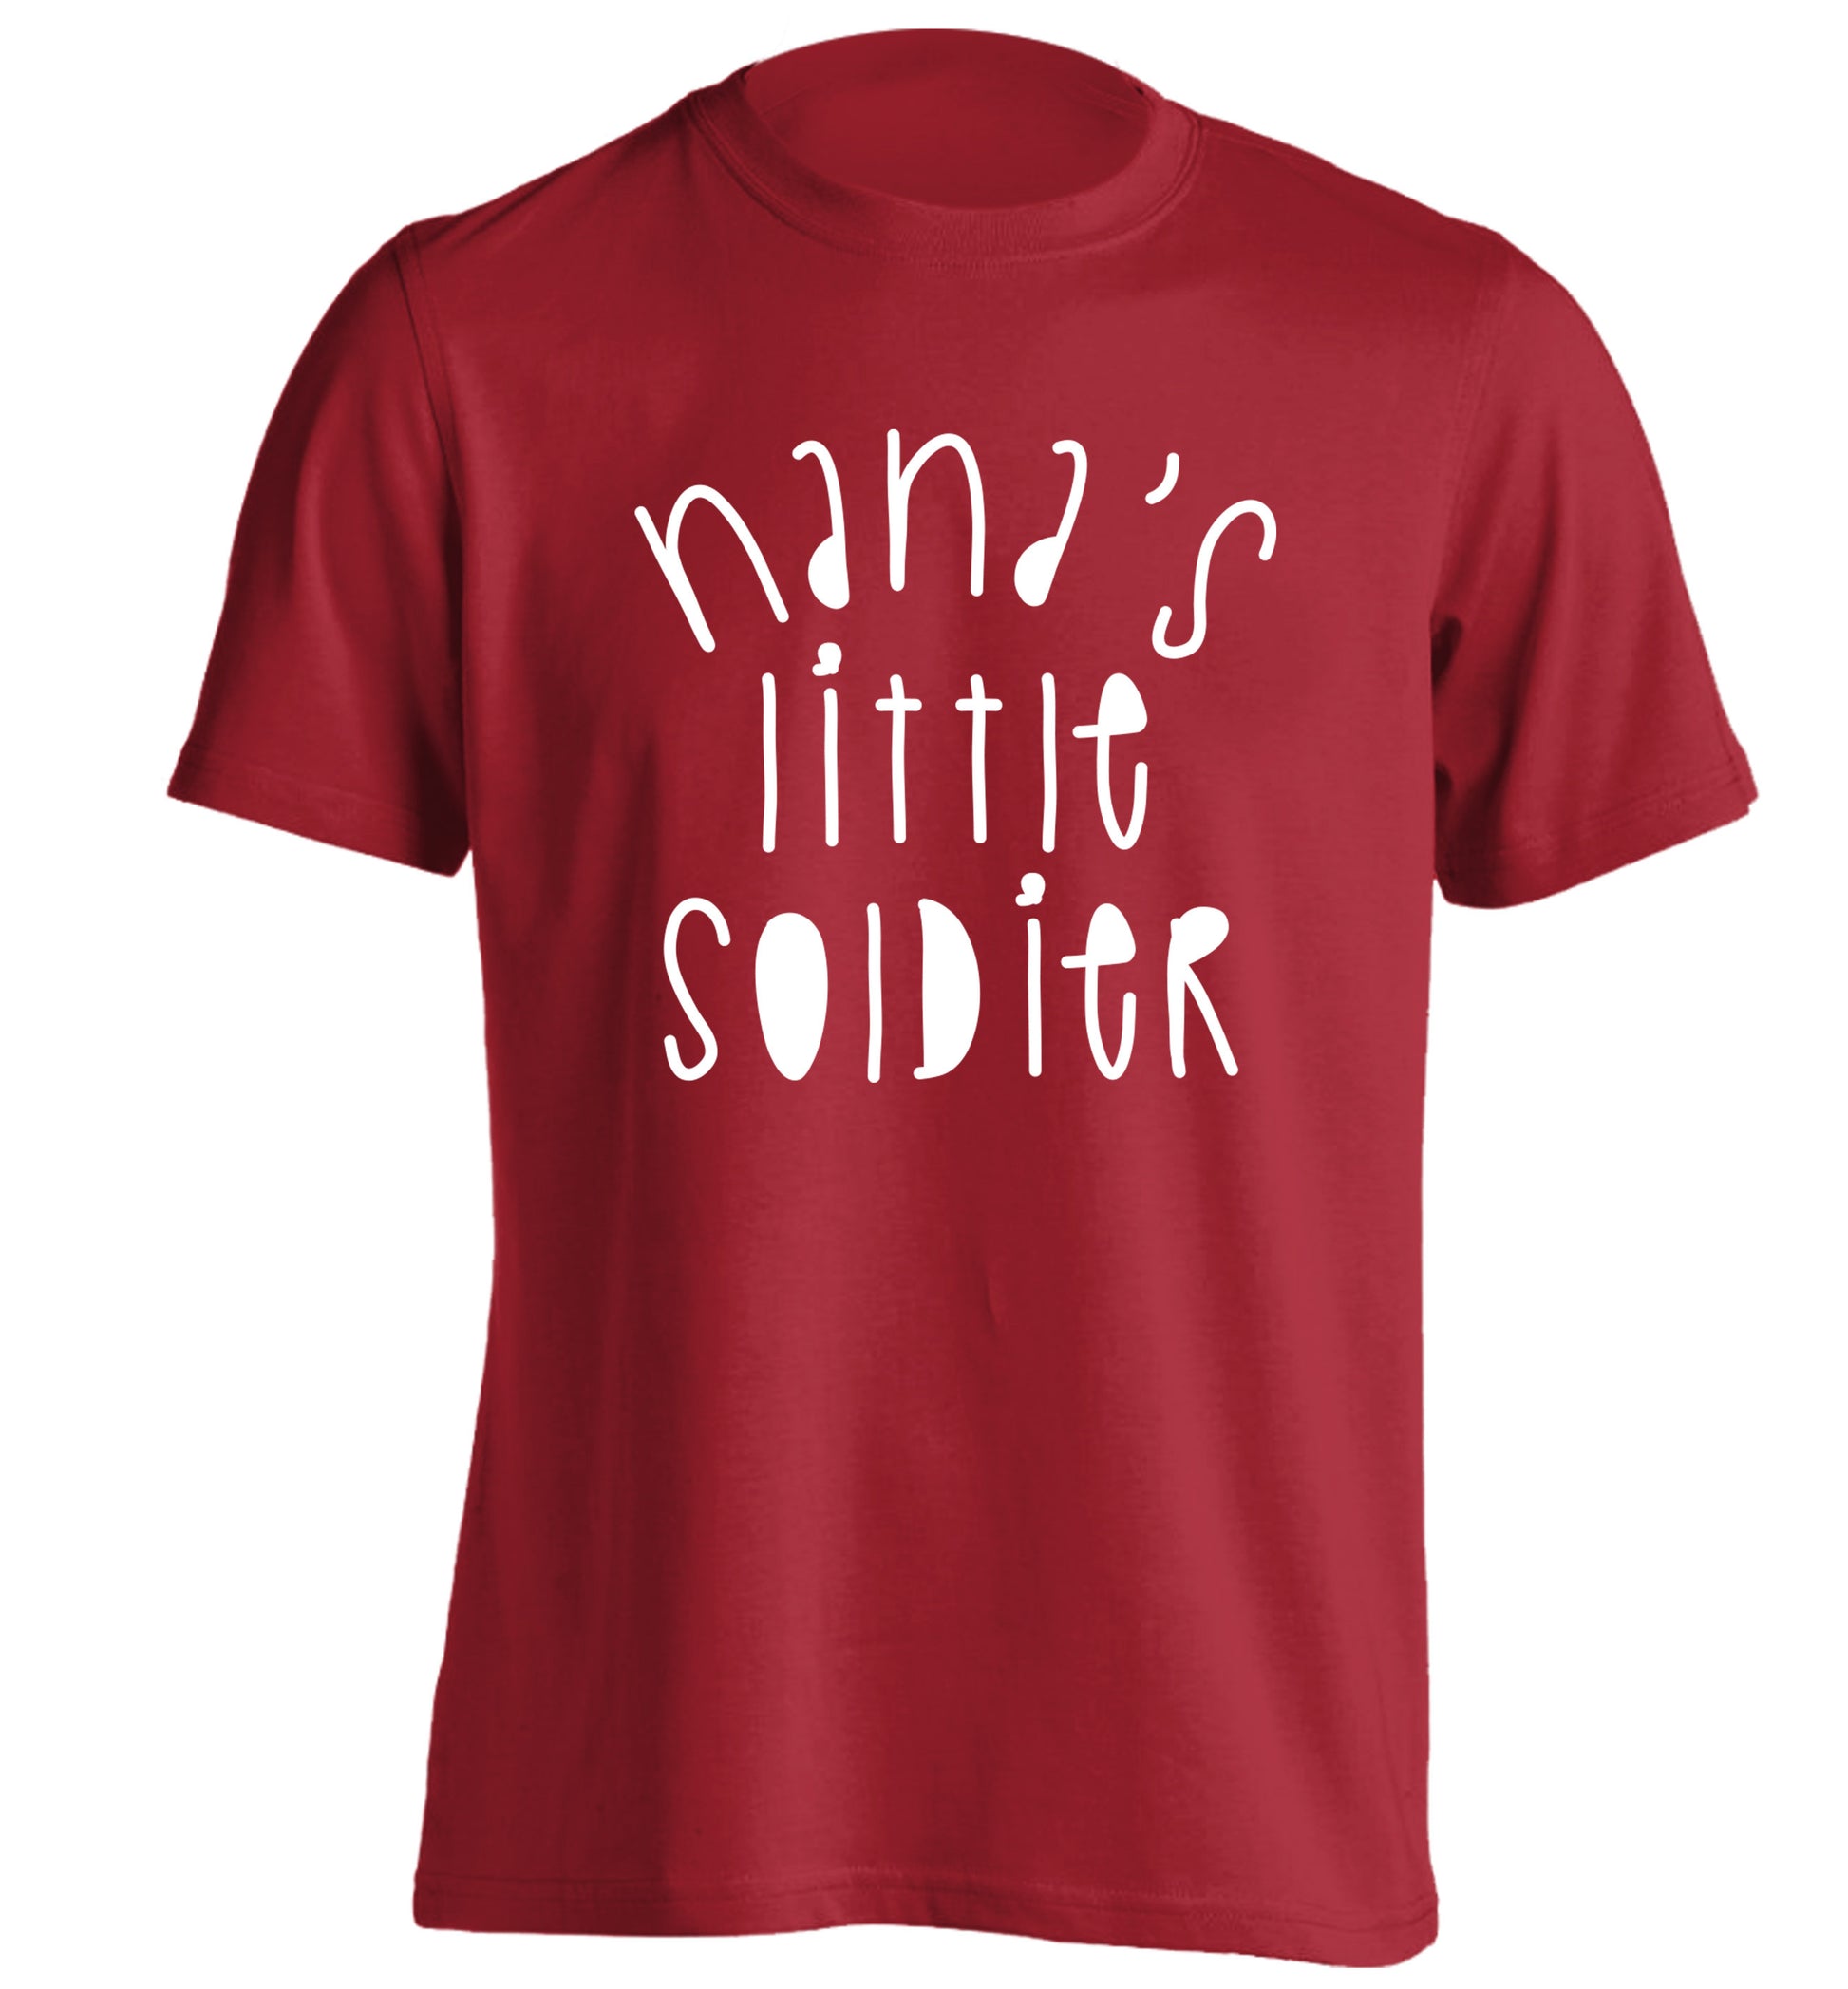 Nana's little soldier adults unisex red Tshirt 2XL